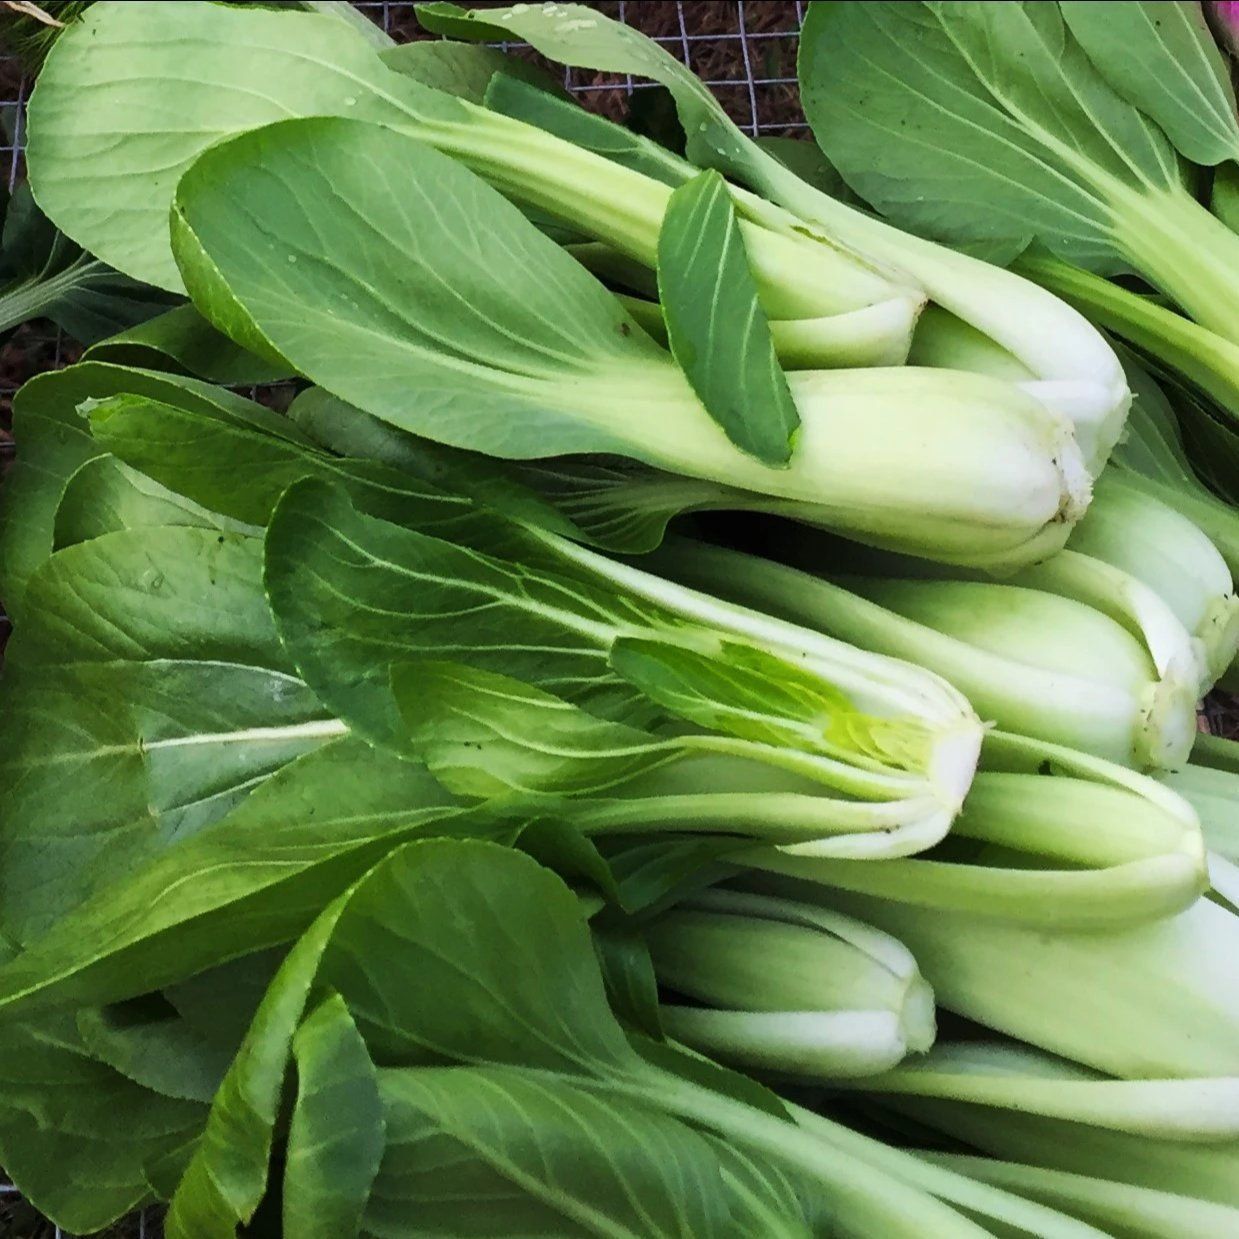 Previous Happening: Spring Week 6: Bok Choy, Tomatoes & new products!